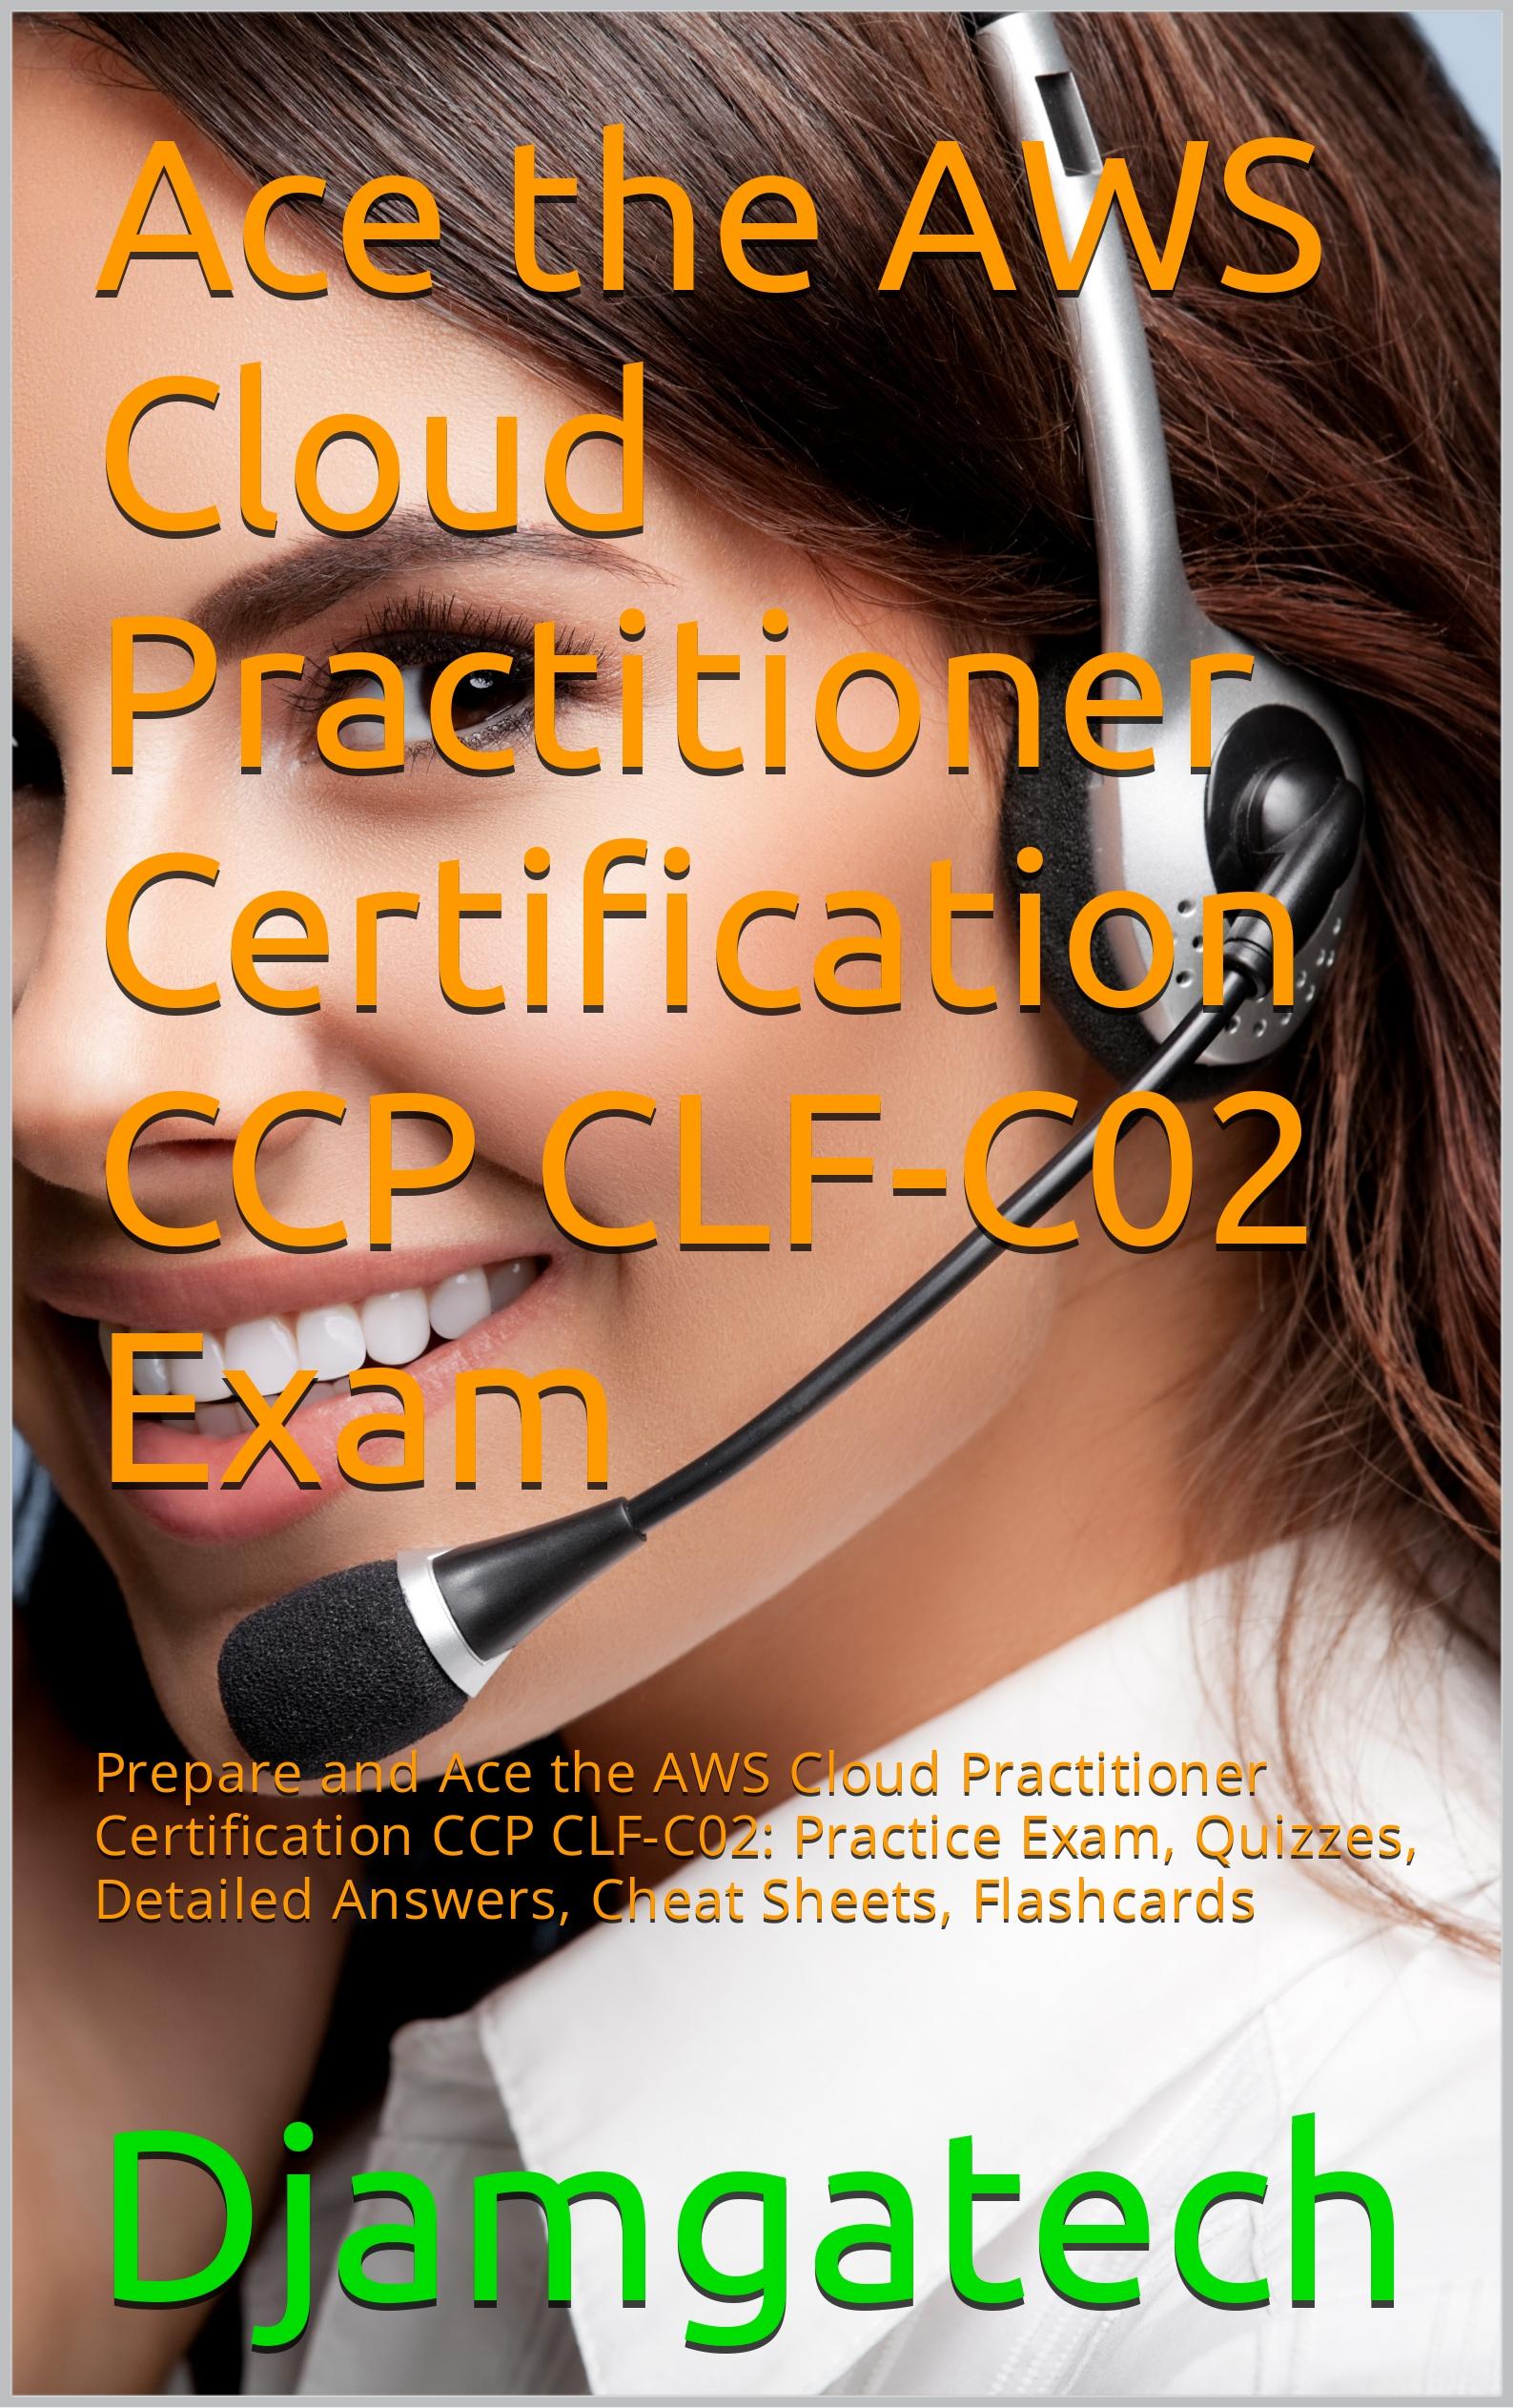 Dive into a comprehensive AWS CCP CLF-C02 Certification guide, masterfully weaving insights from Tutorials Dojo, Adrian Cantrill, Stephane Maarek, and AWS Skills Builder into one unified resource.